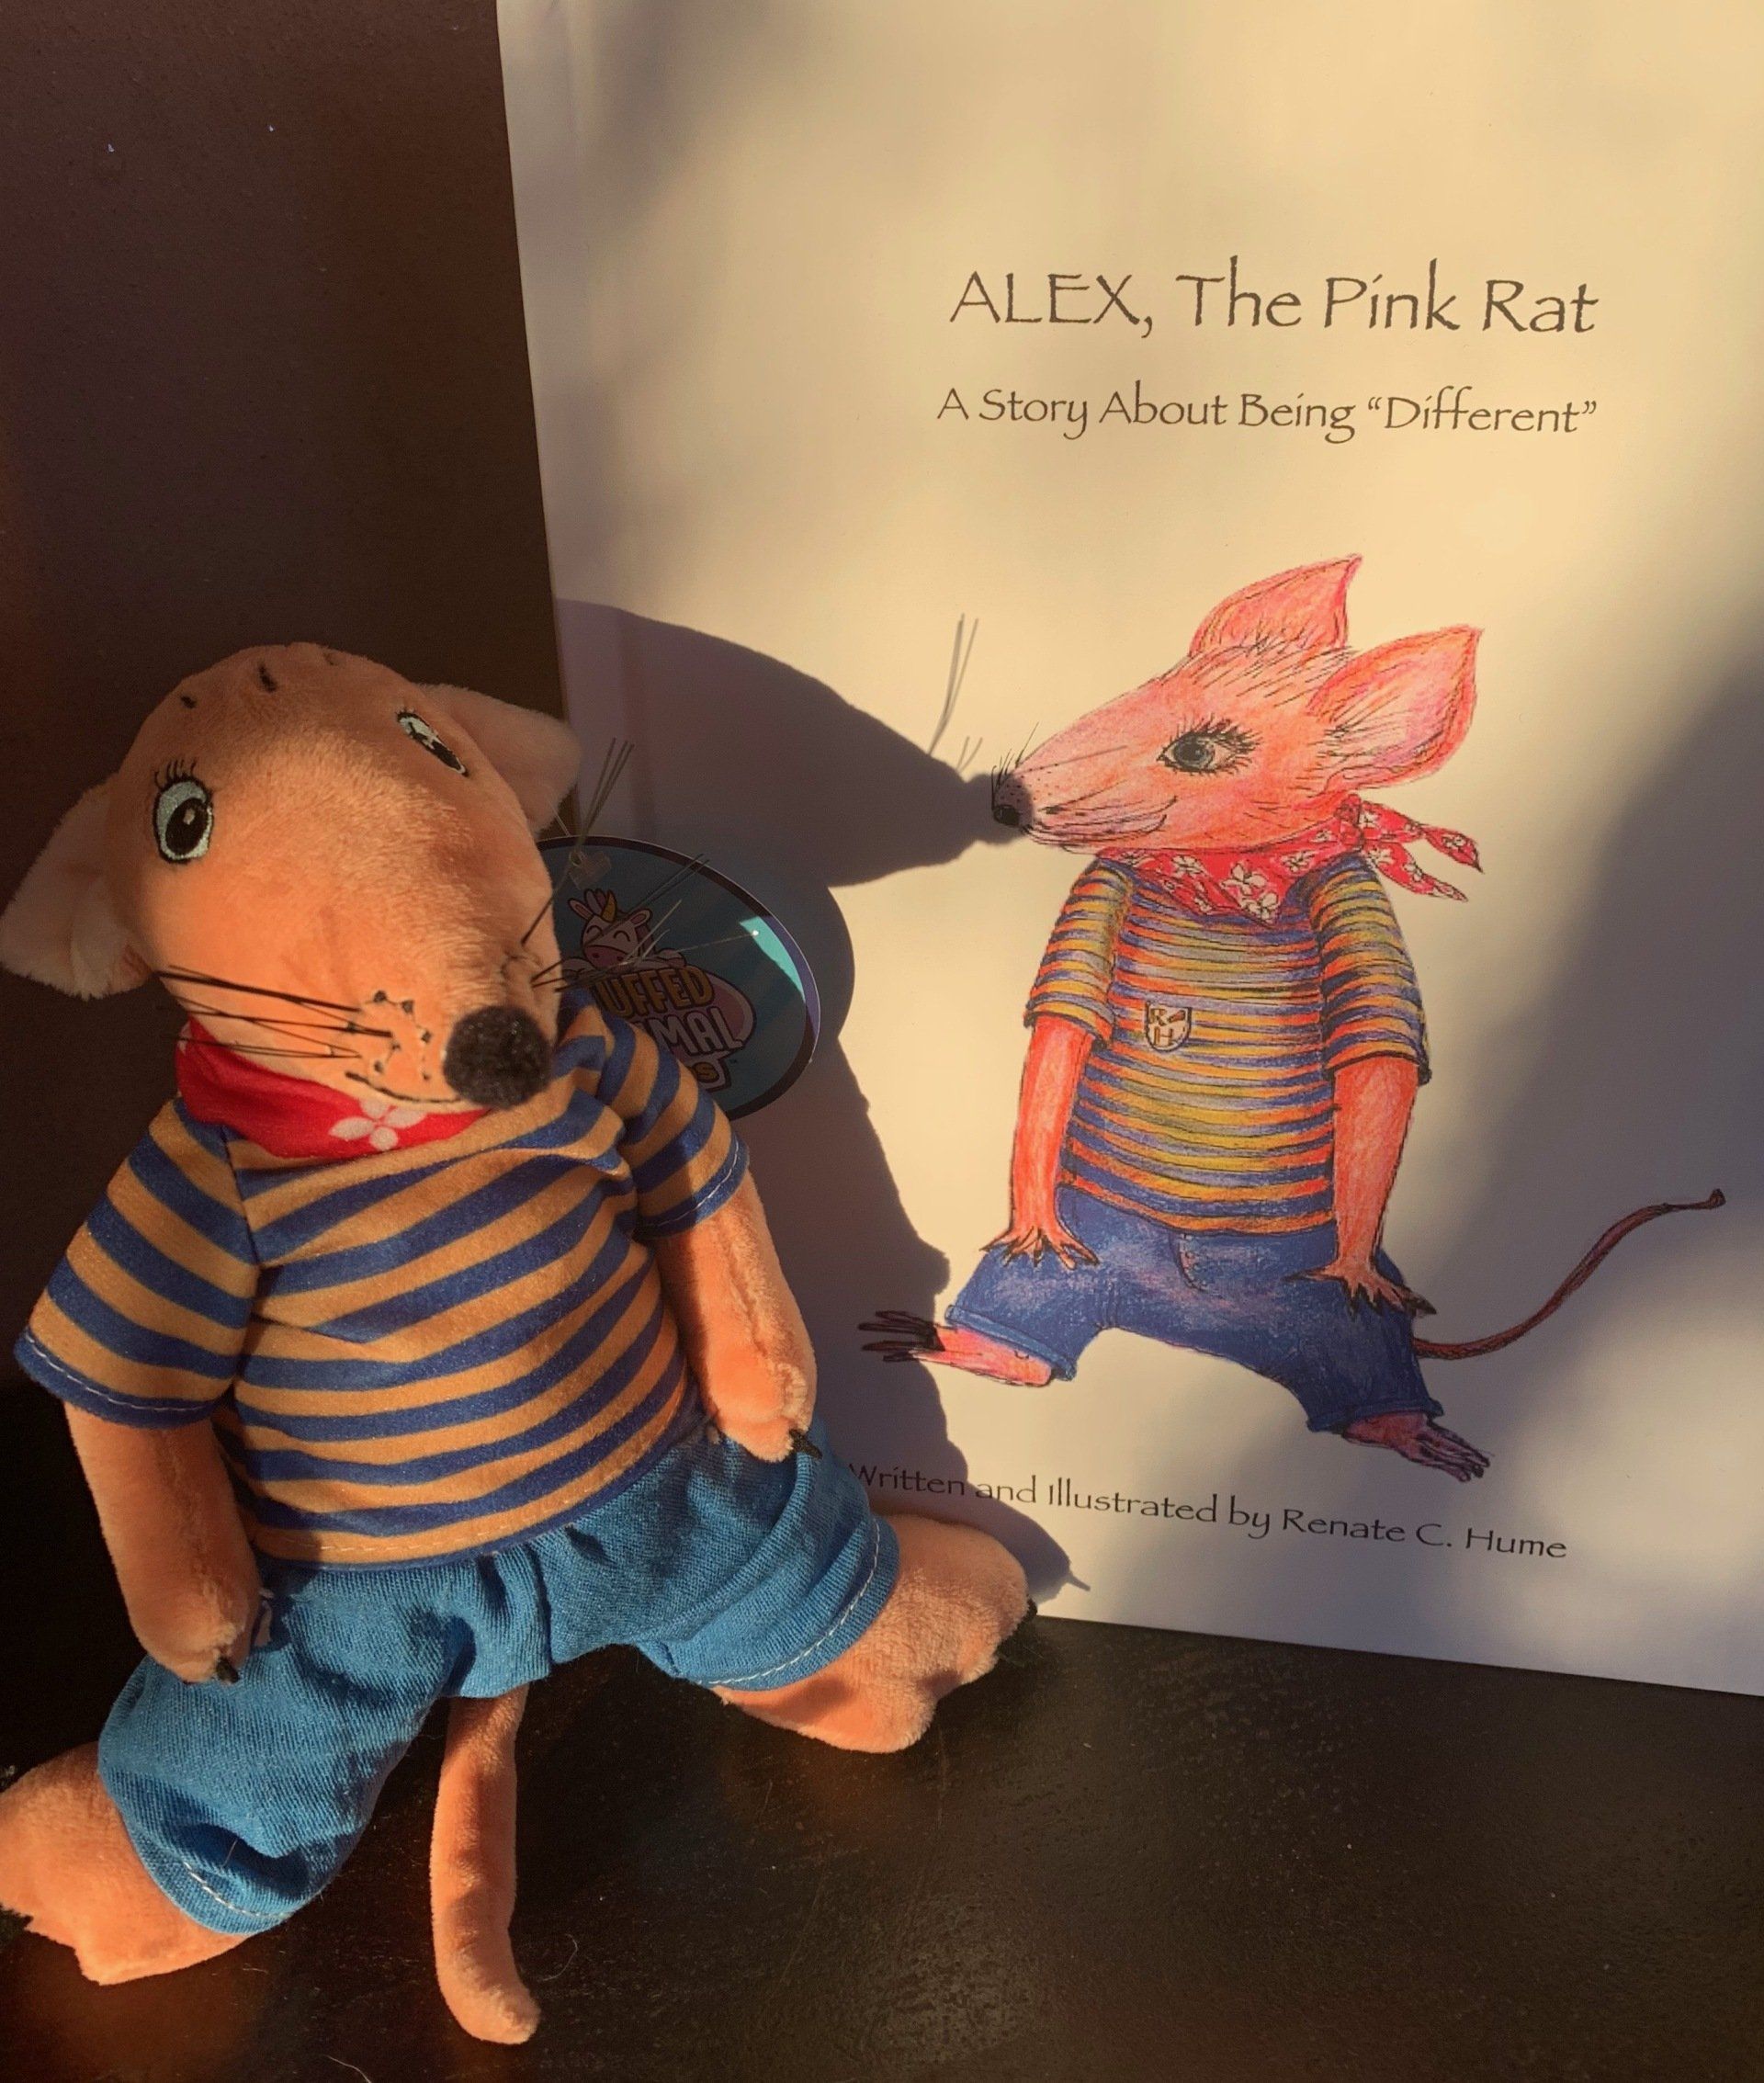 ALEX, The Pink Rat book with plushie toy sitting next to it